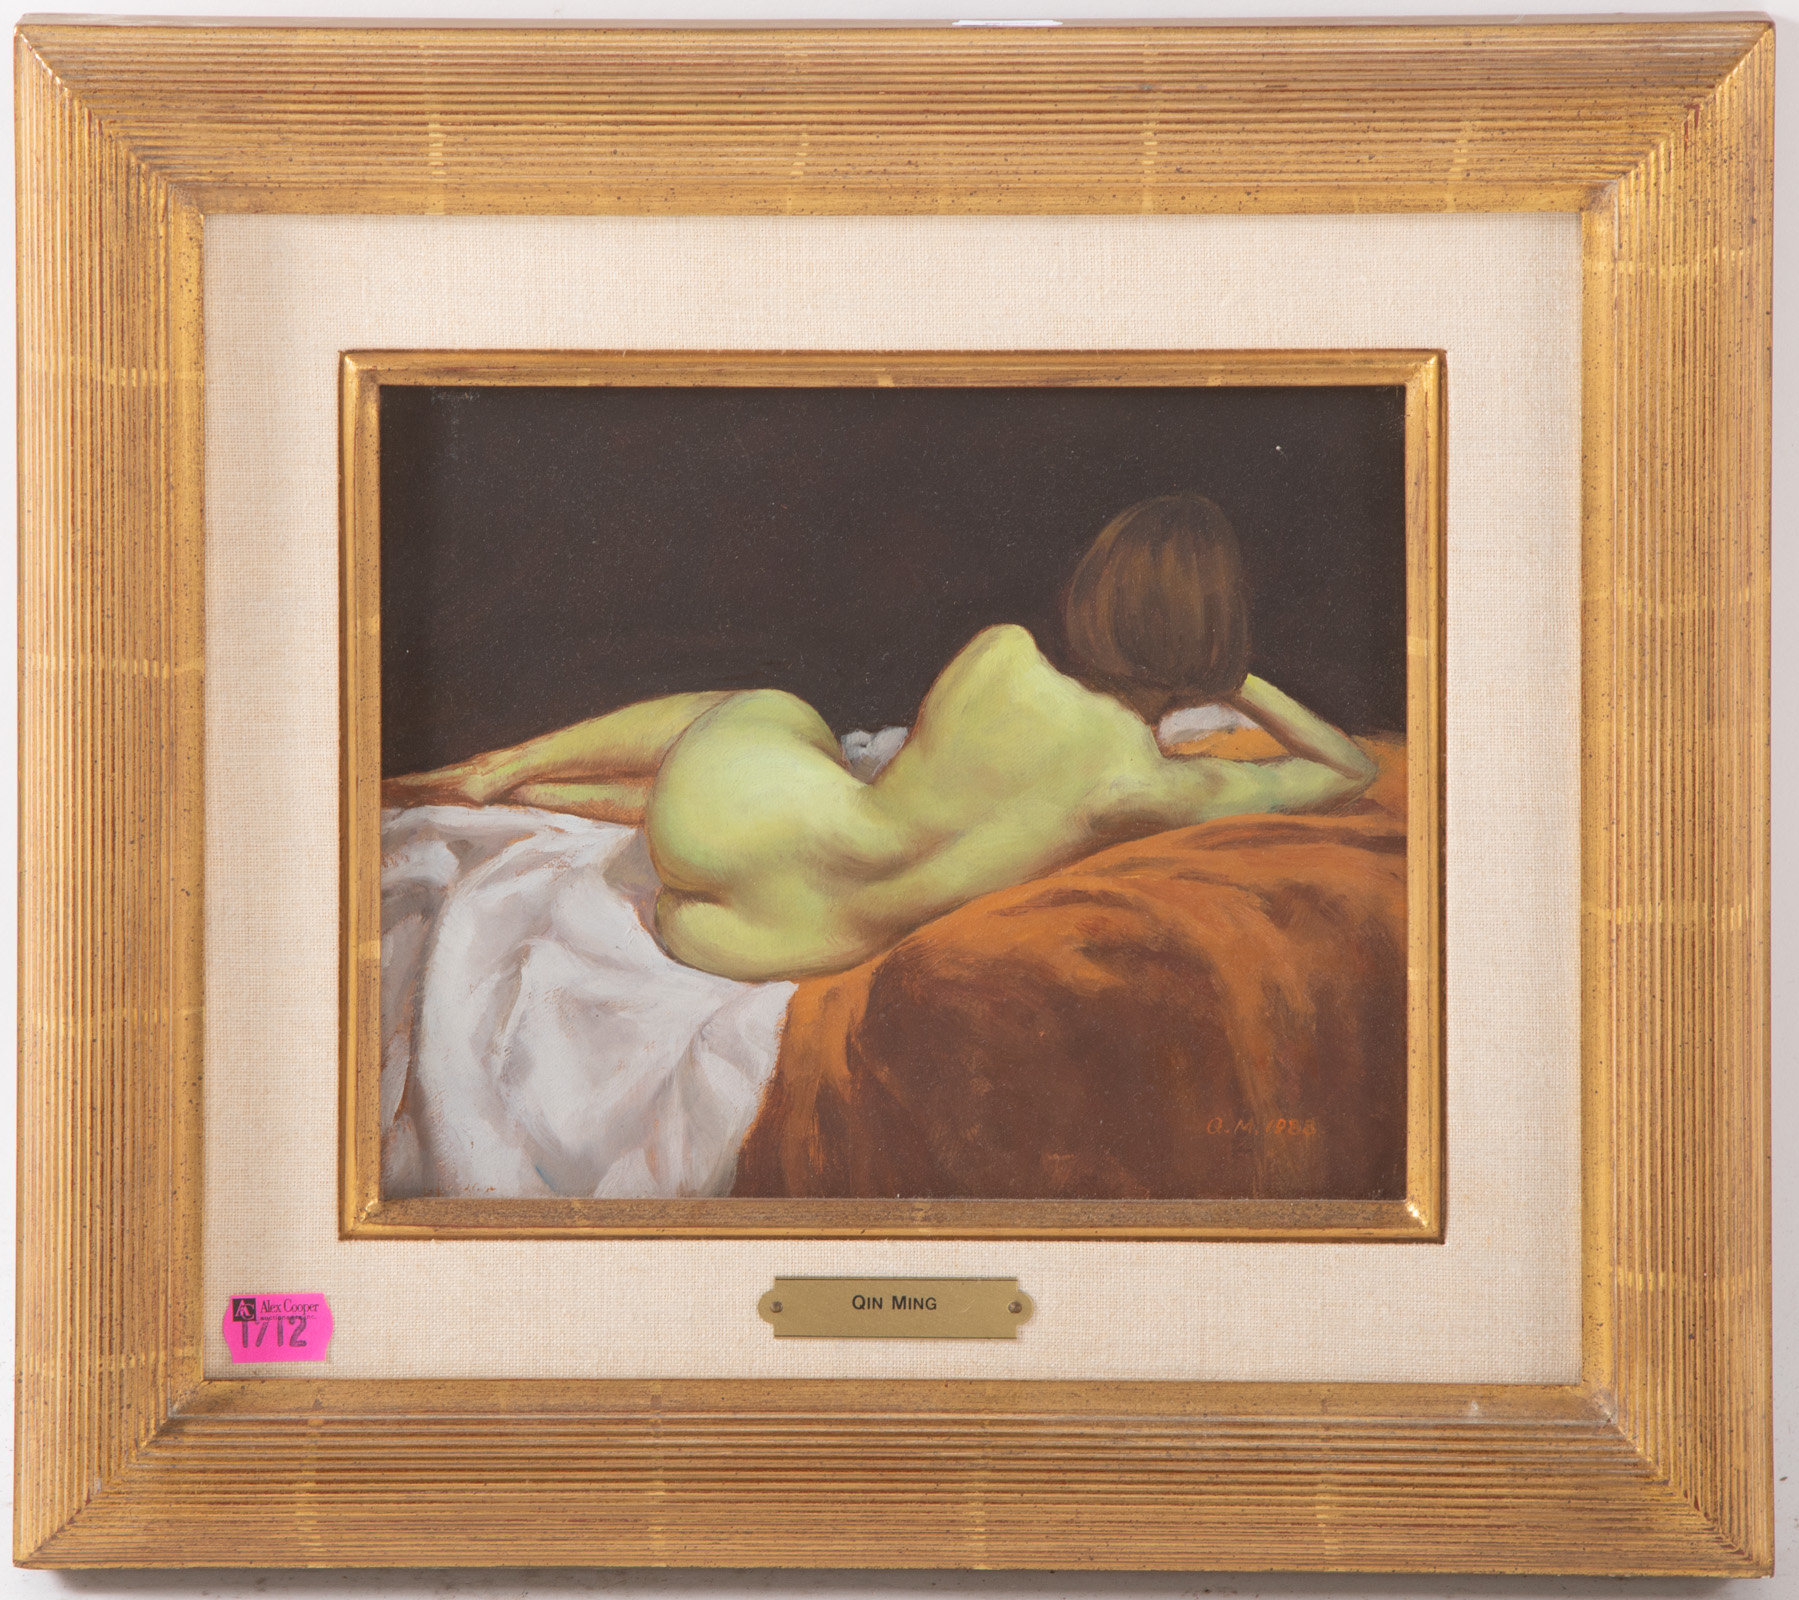 QIN MING. FEMALE NUDE LYING ON A BED,